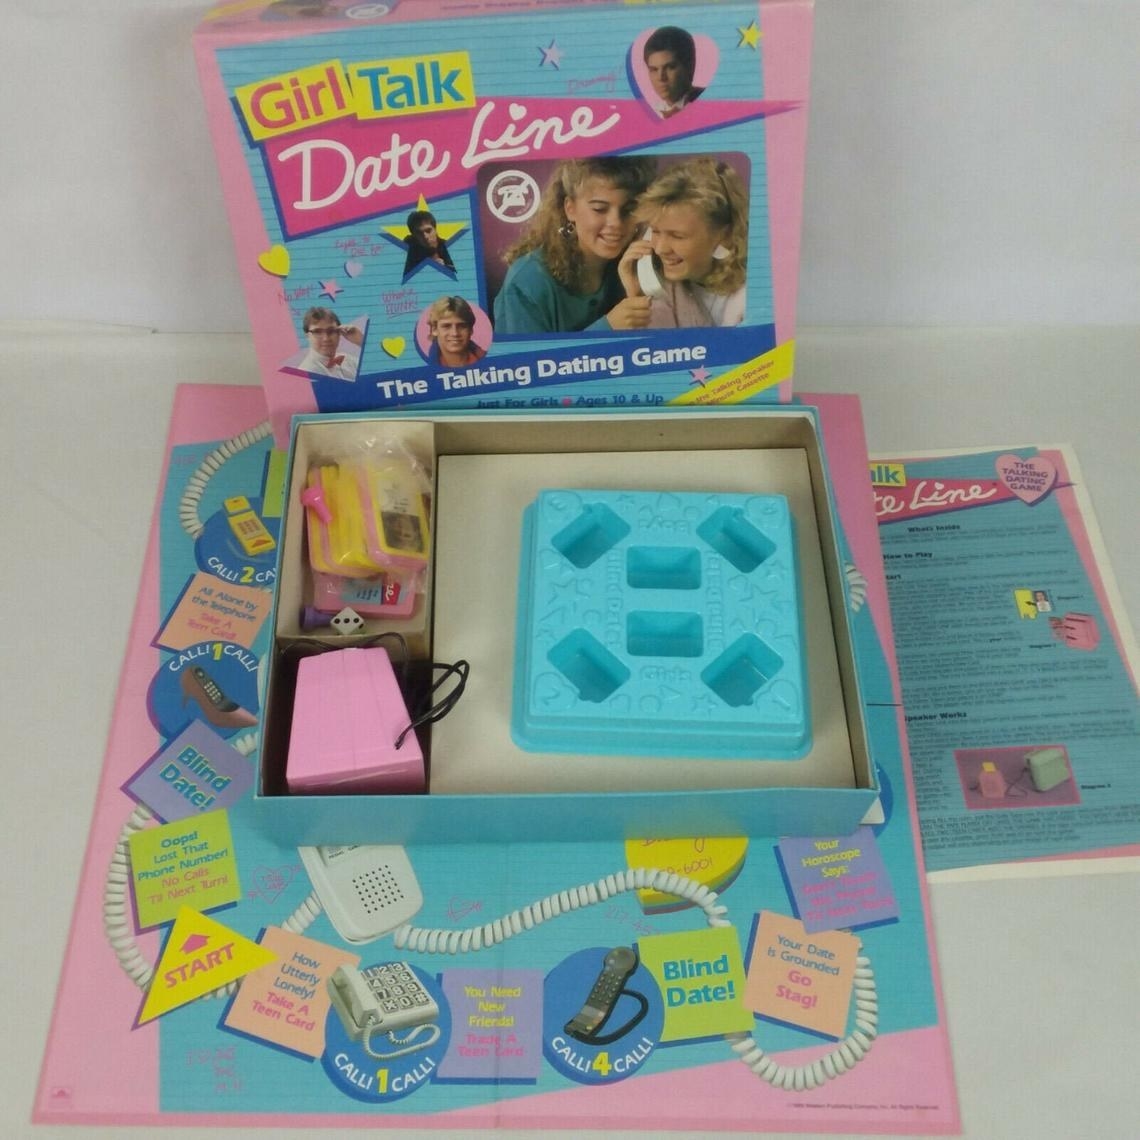 A Girl Talk Date Line game board set up